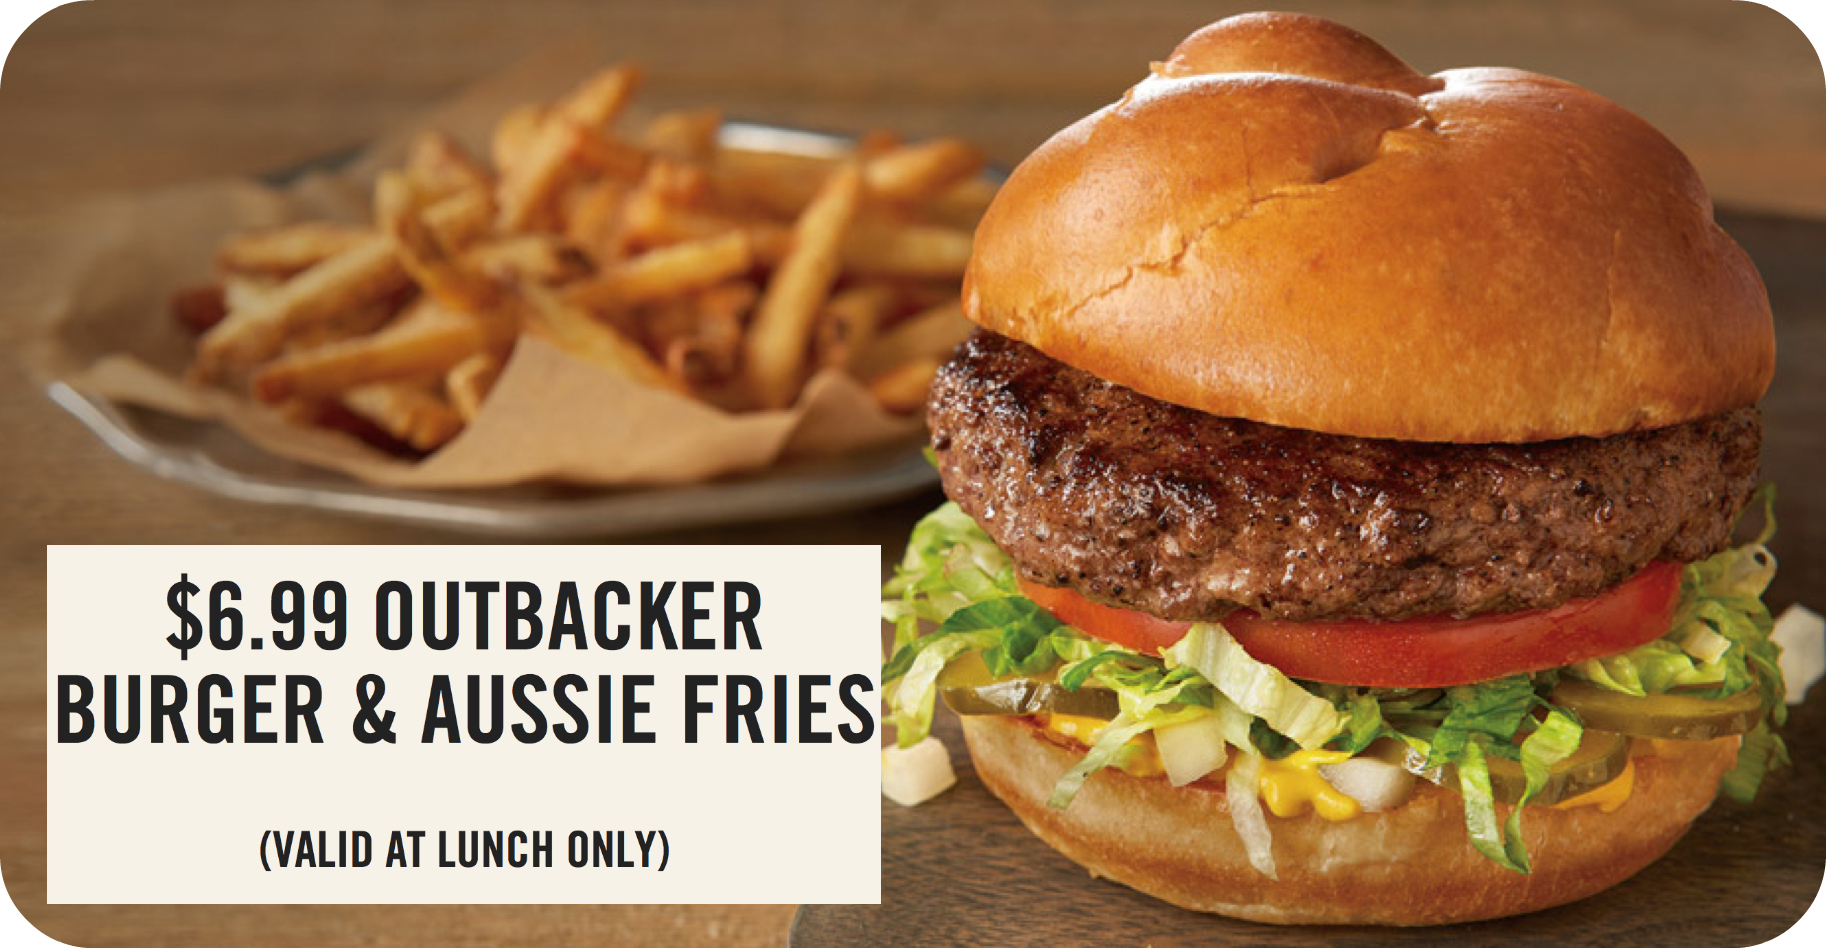 outback-steakhouse-outbacker-burger-aussie-fries-lunch-special-only